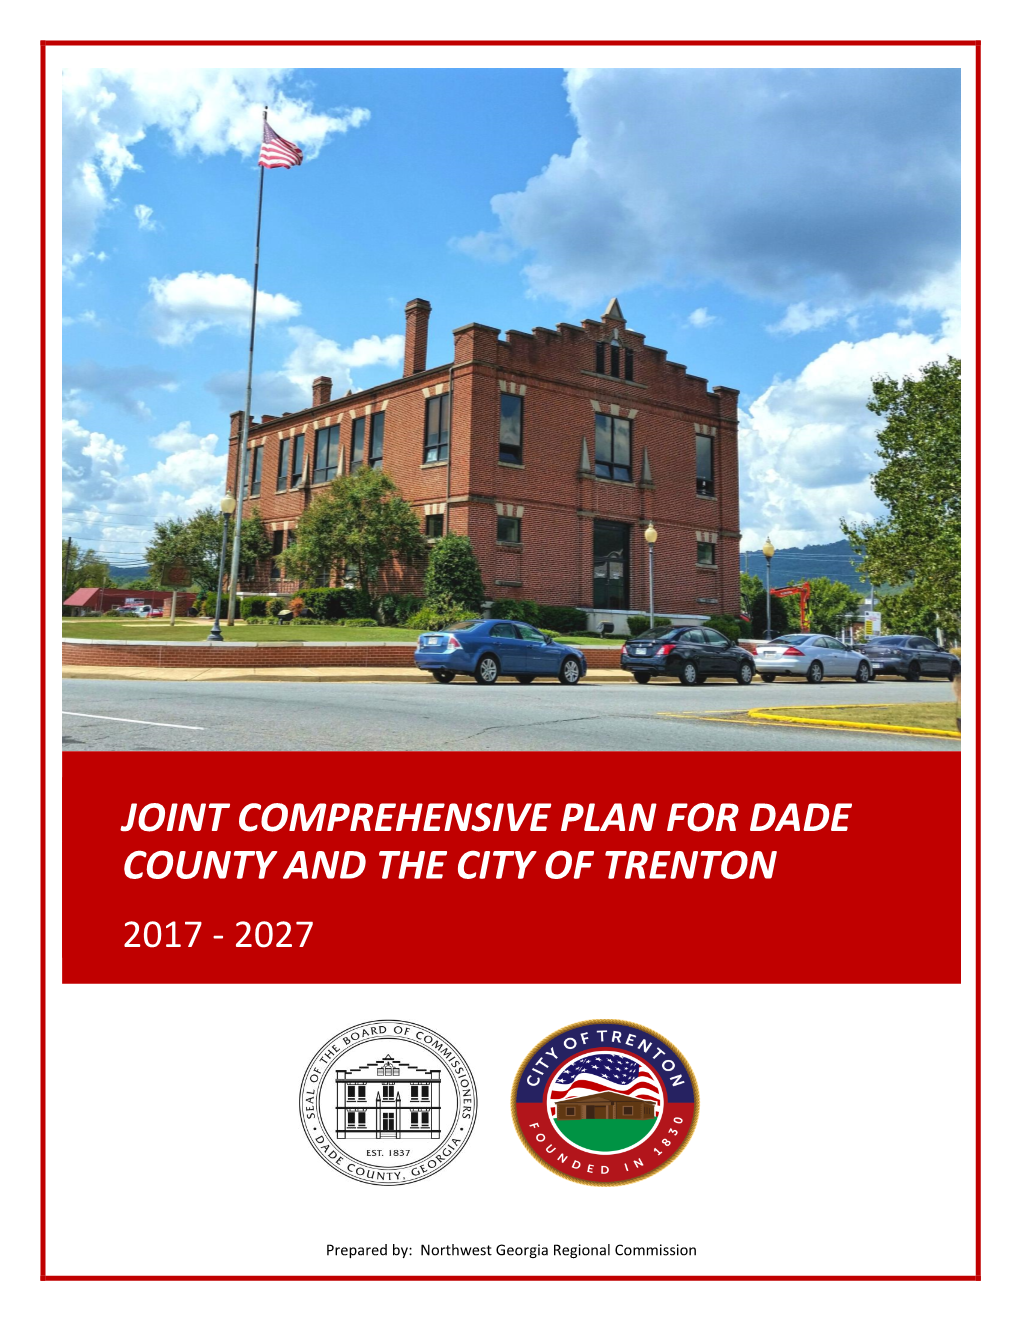 Joint Comprehensive Plan for Dade County and the City of Trenton 2017 - 2027